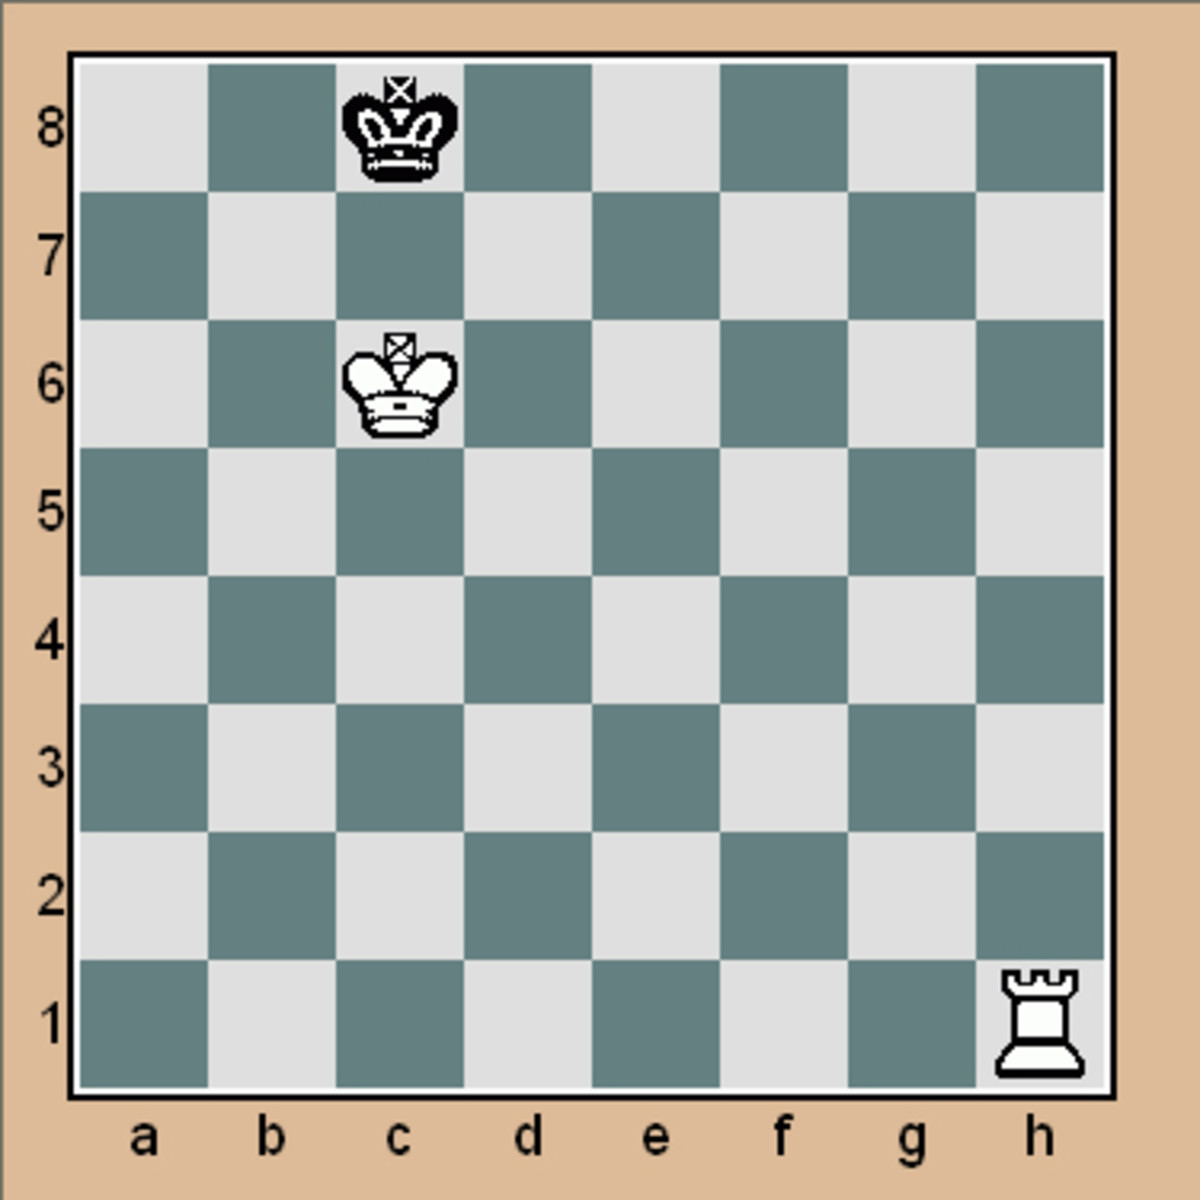 Beginner chess puzzle (Click to enlarge)